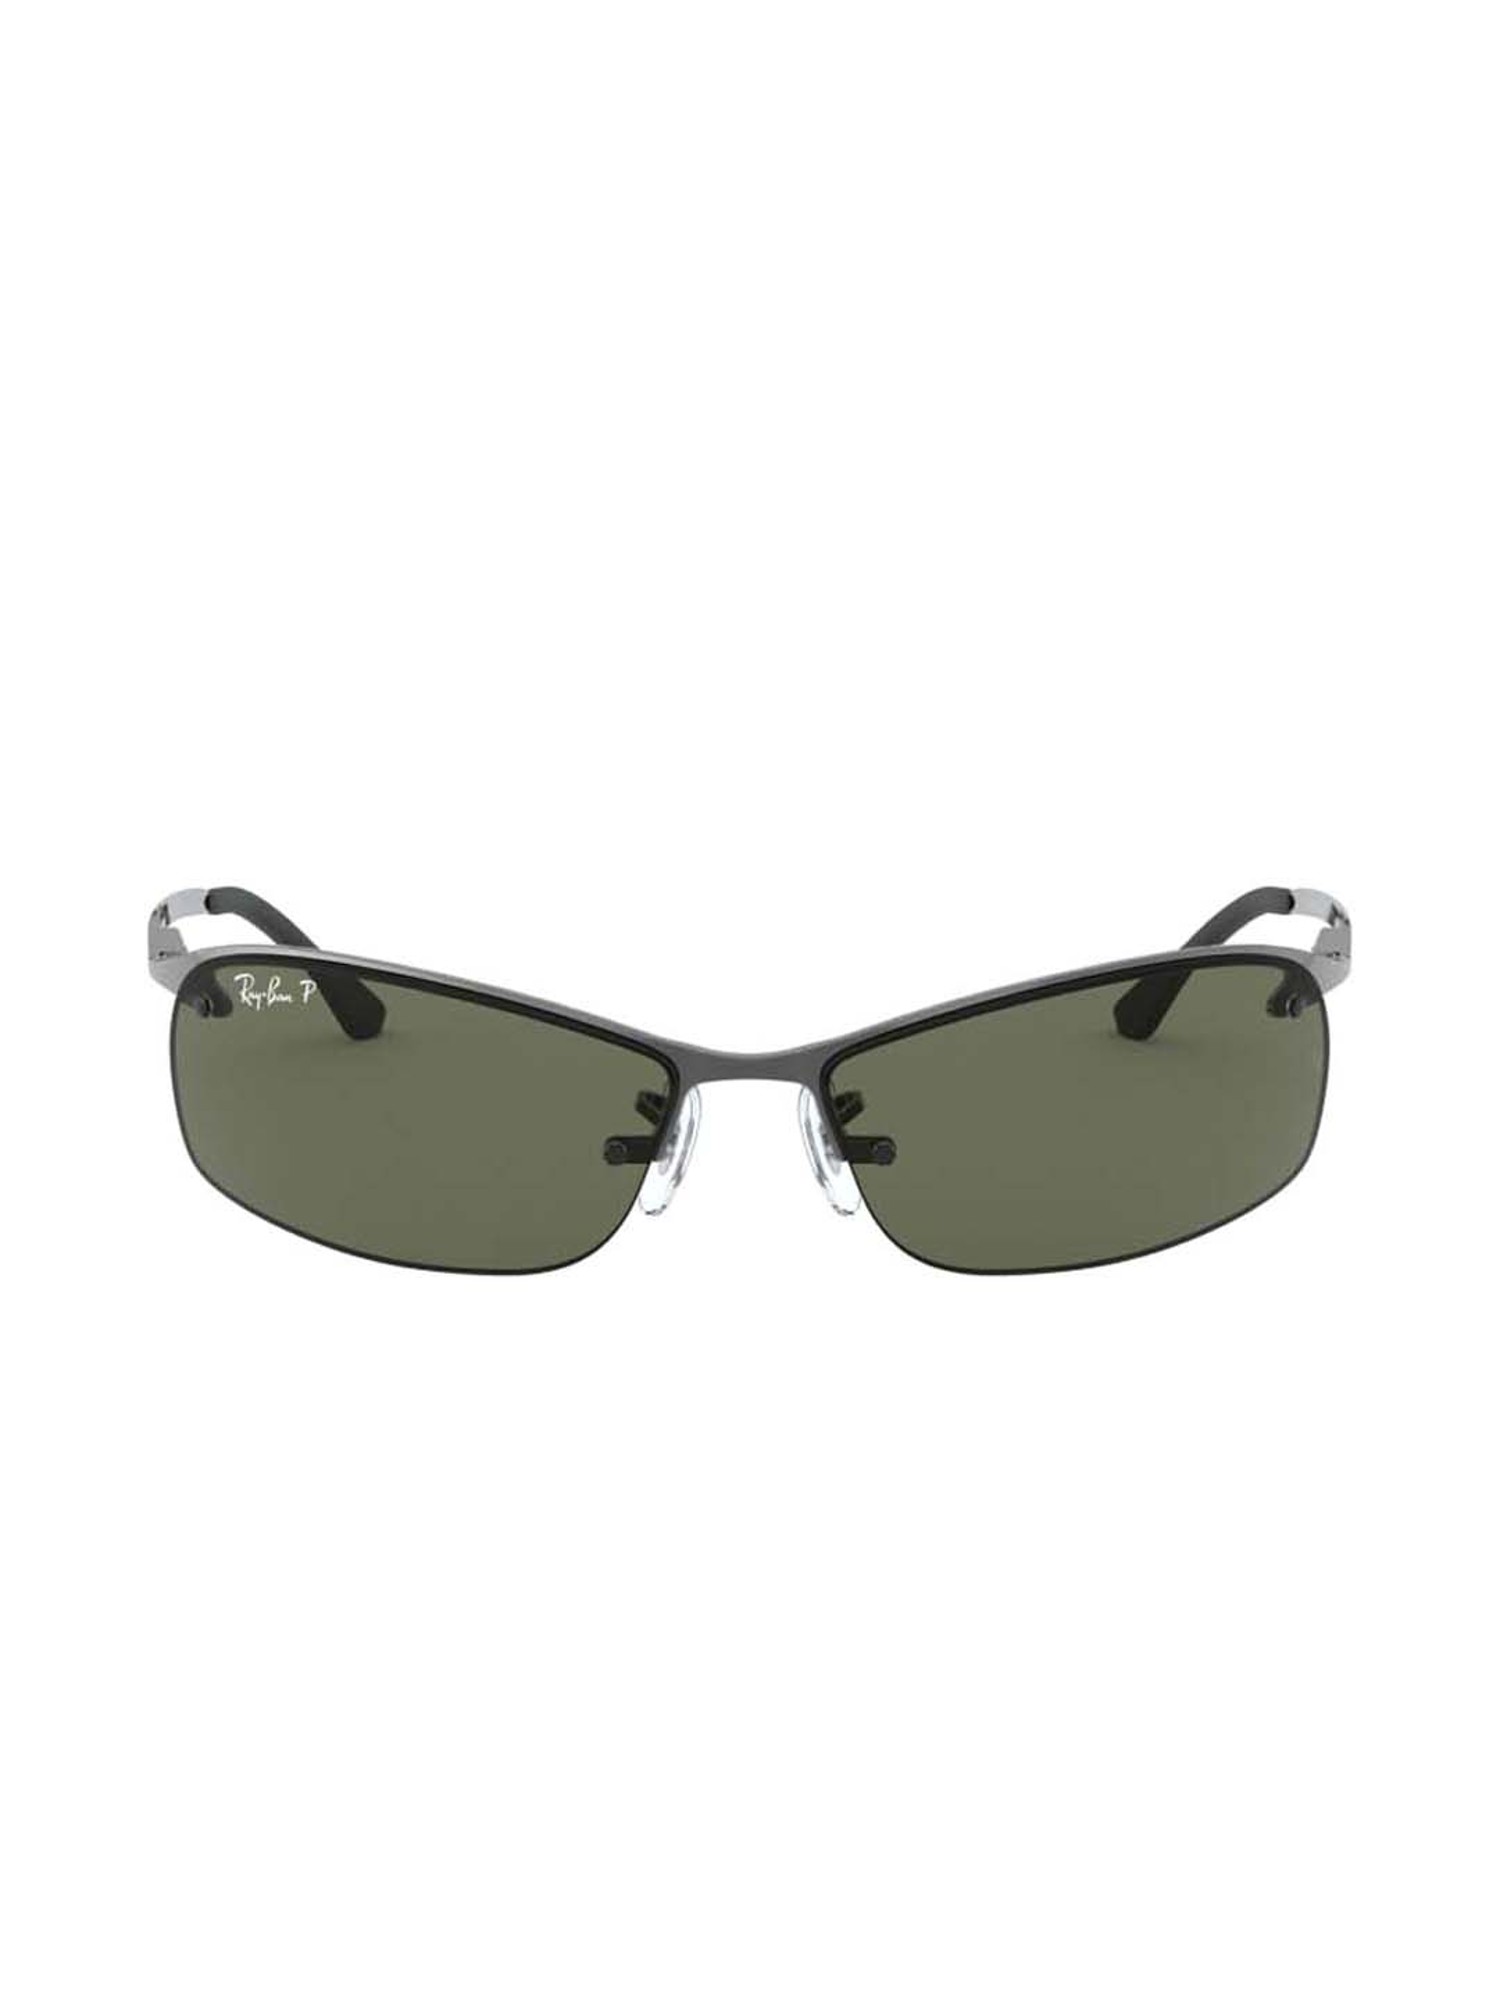 Ray Ban 0rb31 Green Polarized Active Lifestyle Rectangular Sunglasses 63 Mm From Ray Ban At Best Prices On Tata Cliq